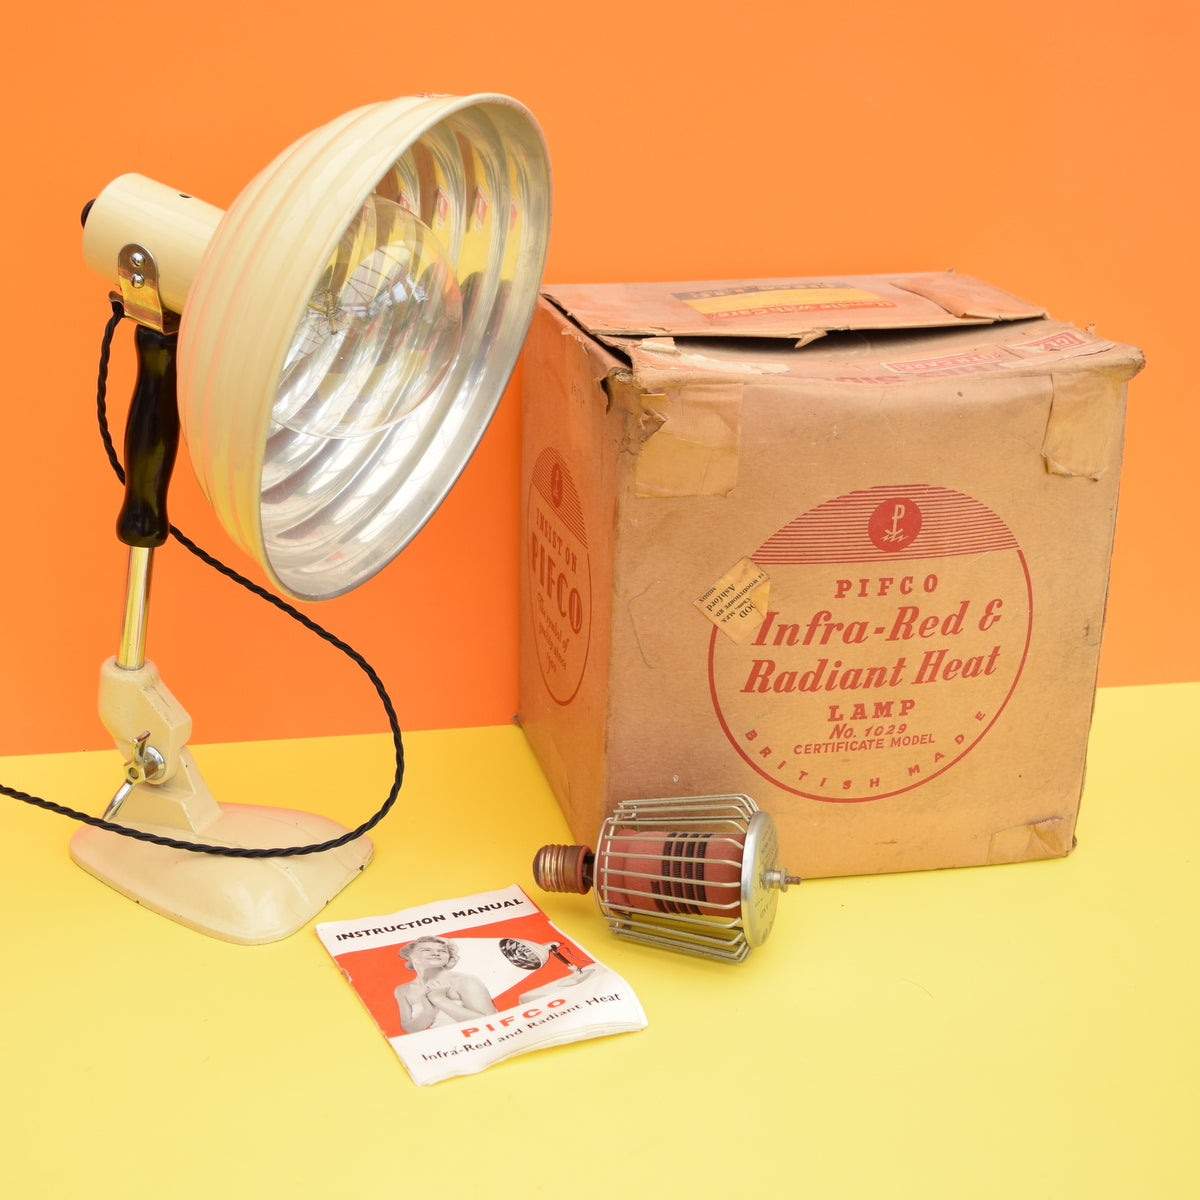 Vintage 1950s Pifco Metal Desk Lamp With Box - Originally a Heat Lamp